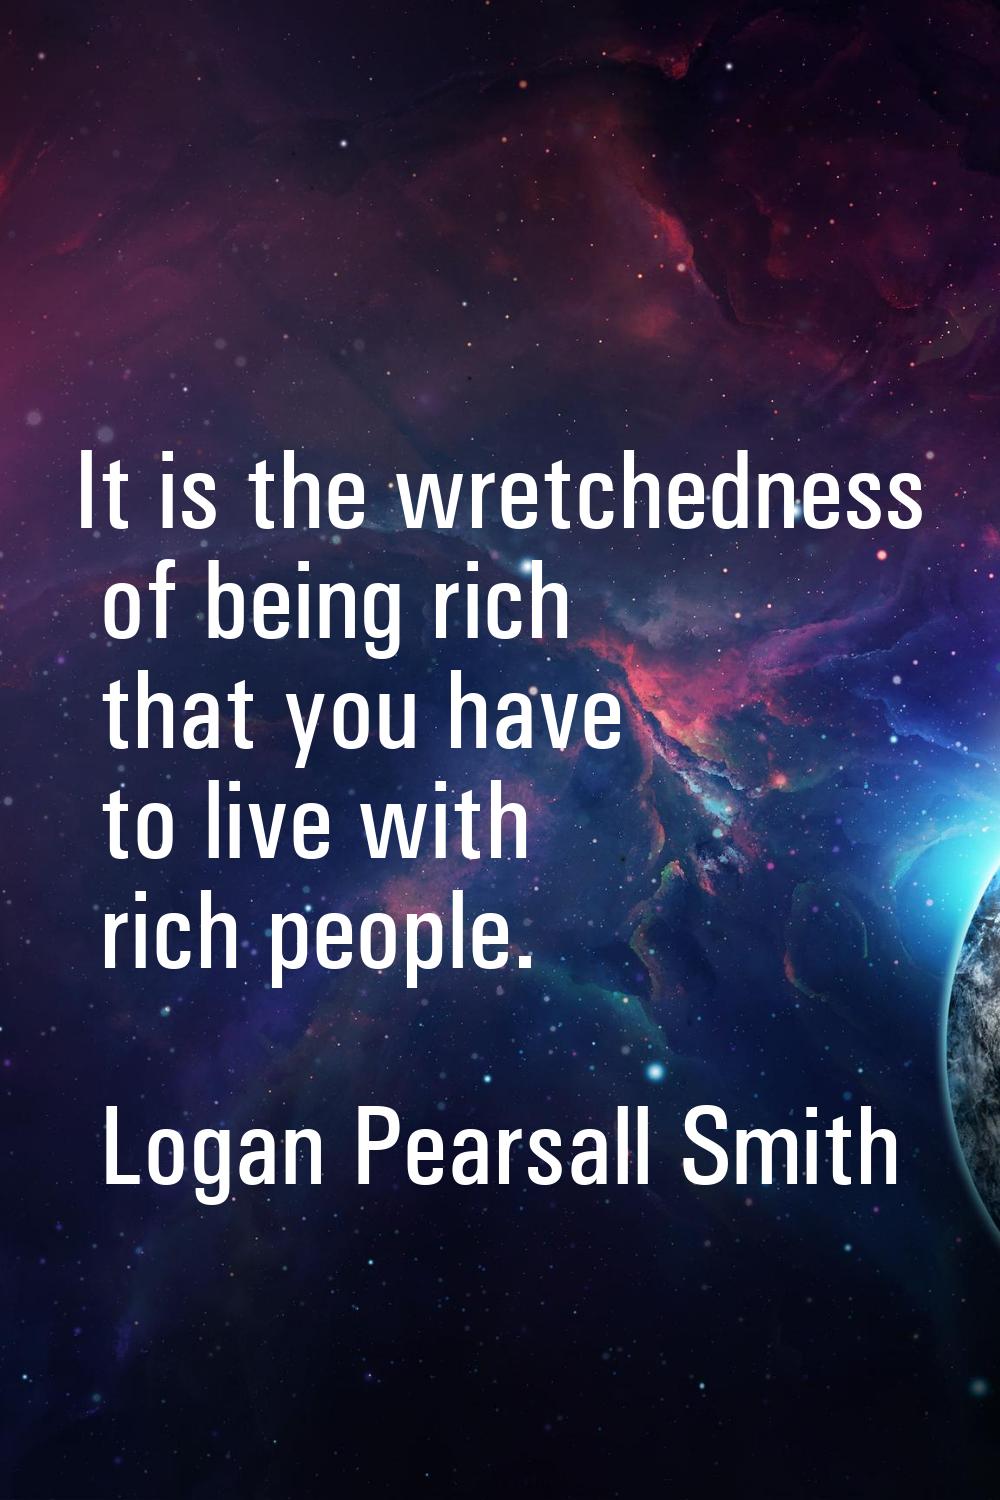 It is the wretchedness of being rich that you have to live with rich people.